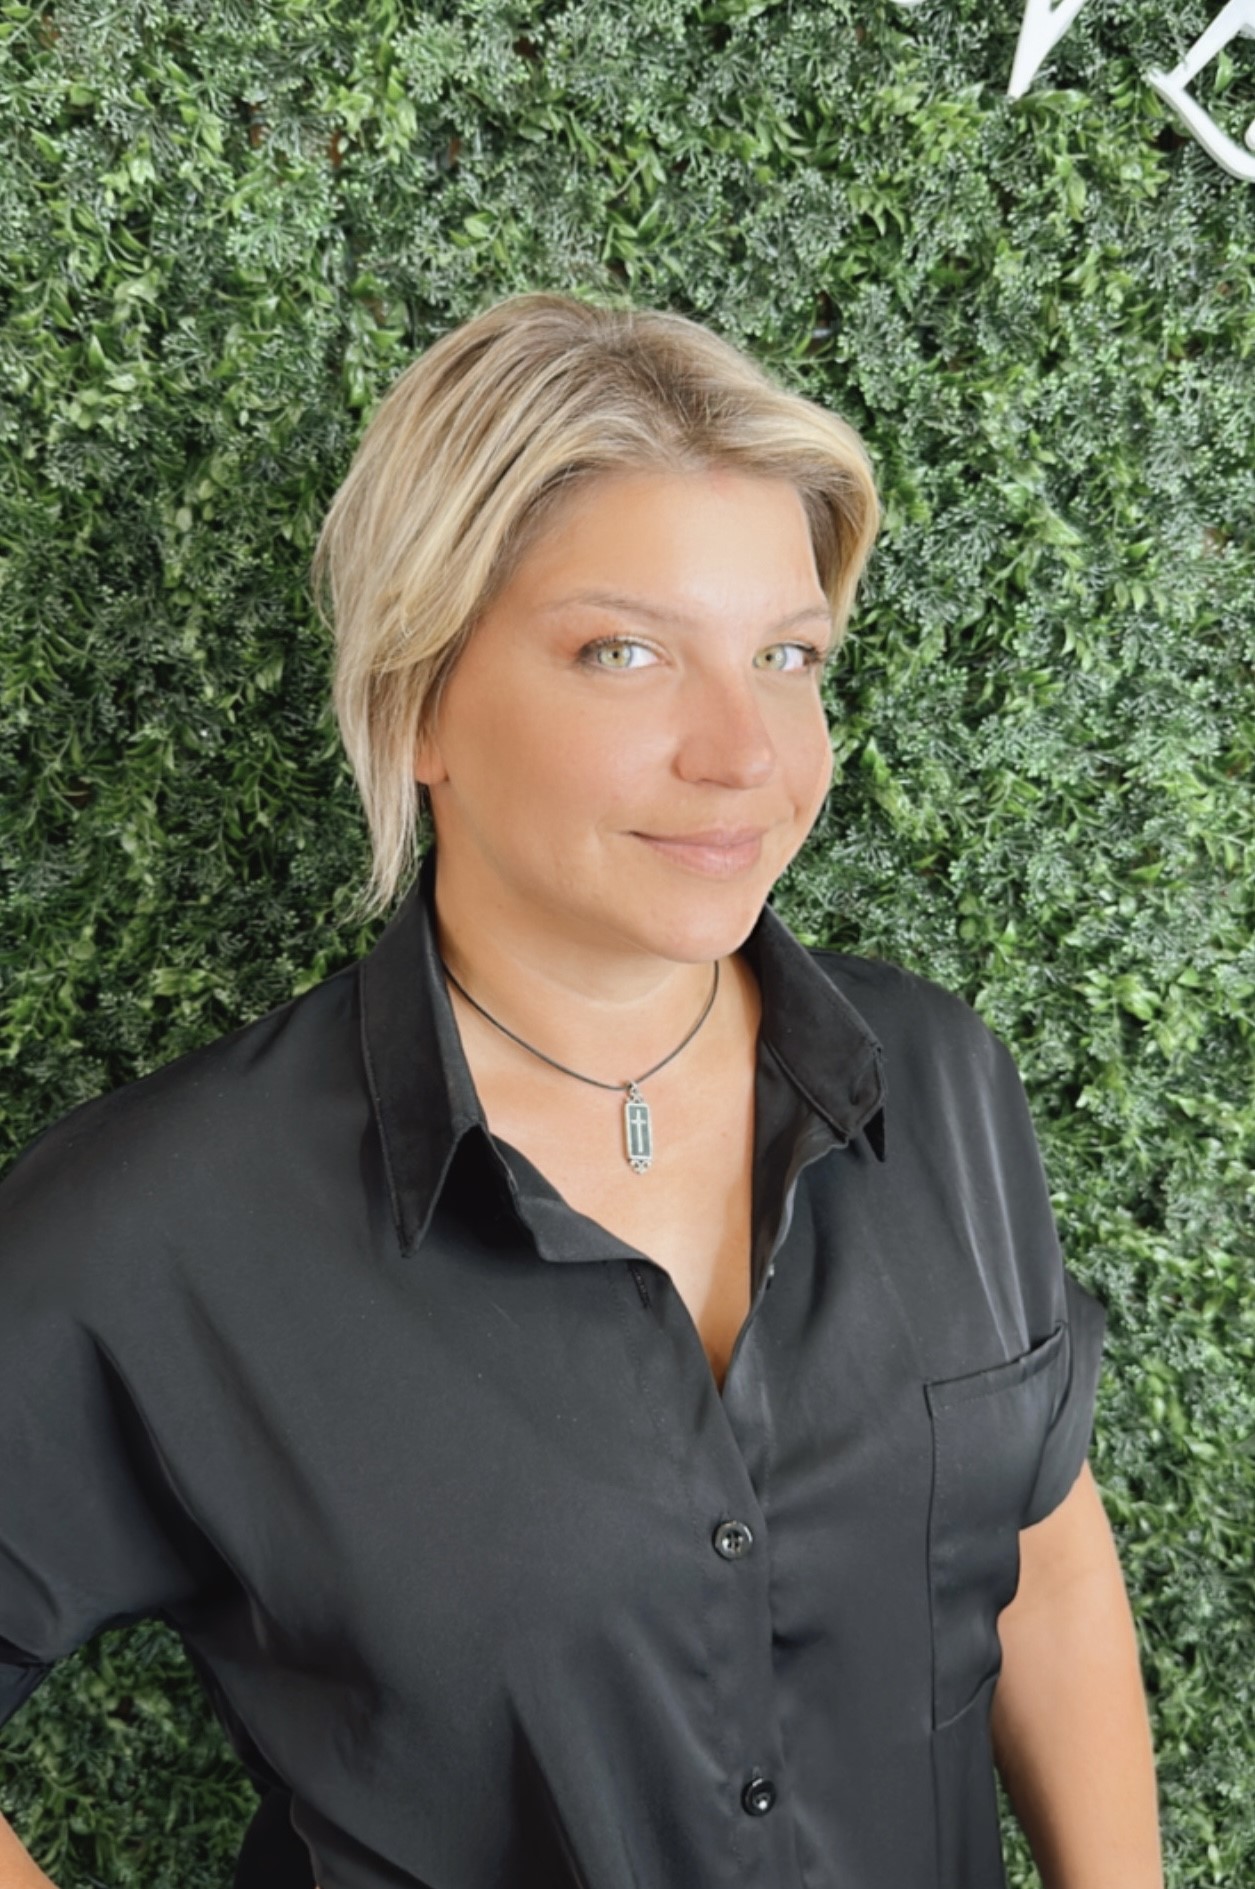 Person wearing a black shirt and necklace with a small pendant, standing against a green leafy background, smiling slightly at the camera, after visiting Josephine's Day Spa.